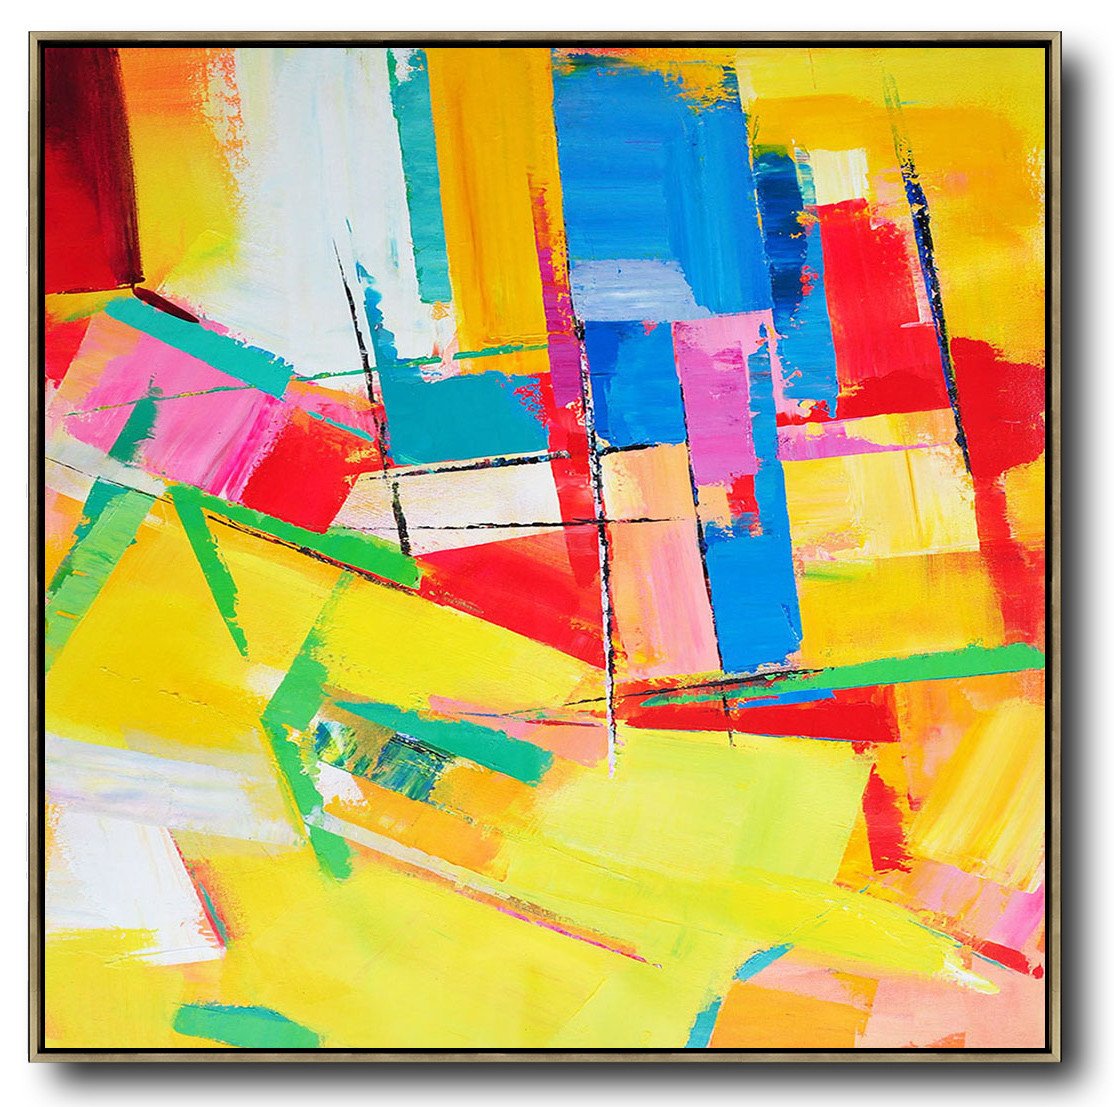 Reviews: Hand-painted oversized Palette Knife Painting Contemporary Art on canvas, large square canvas art - Pop Art Canvas Large